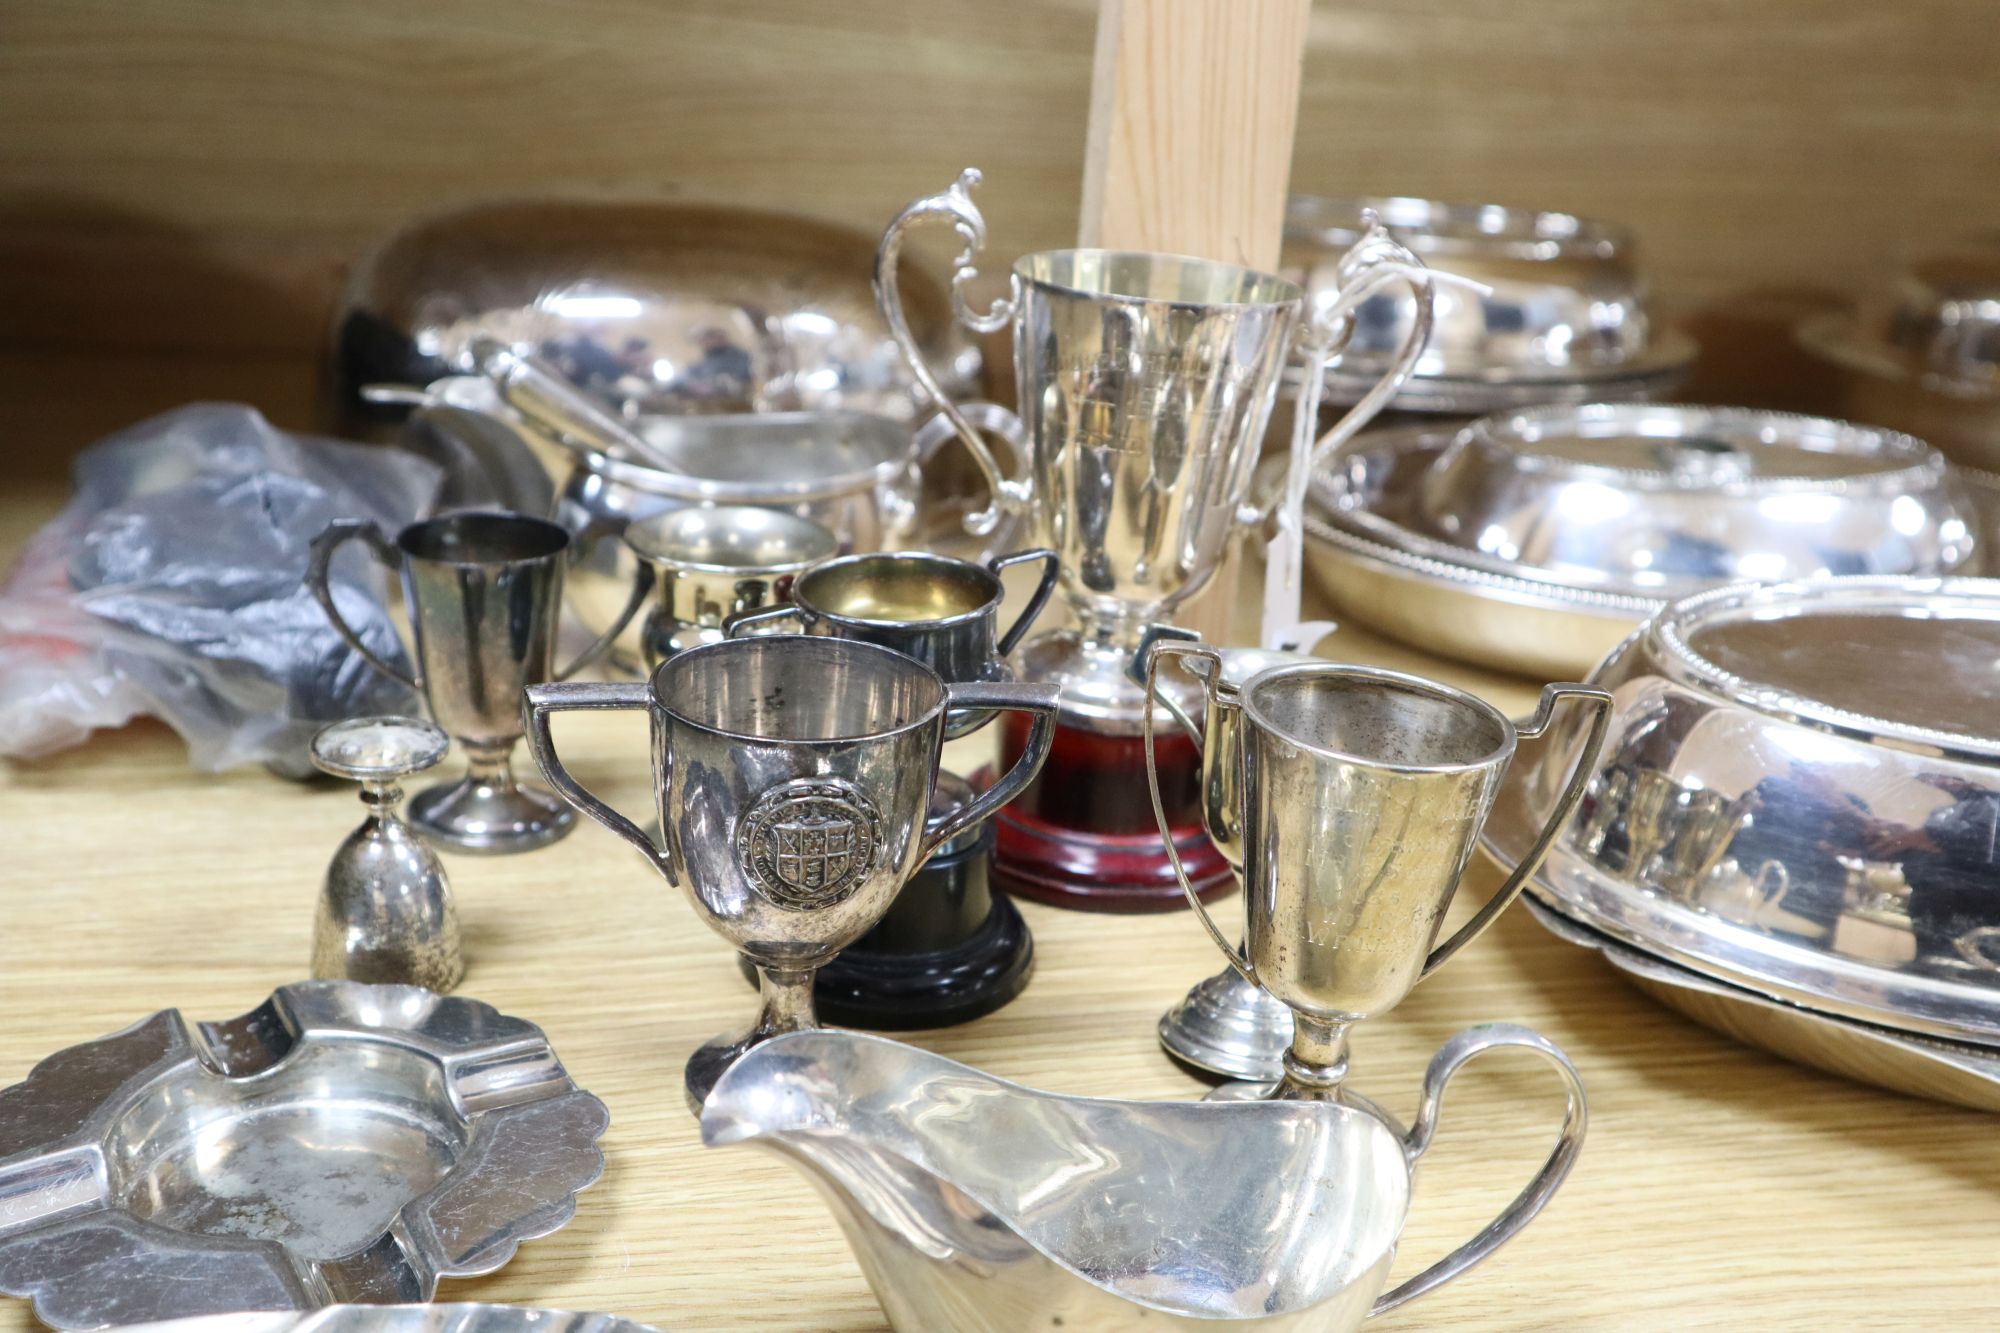 A quantity of plated items, including entree dishes and covers,